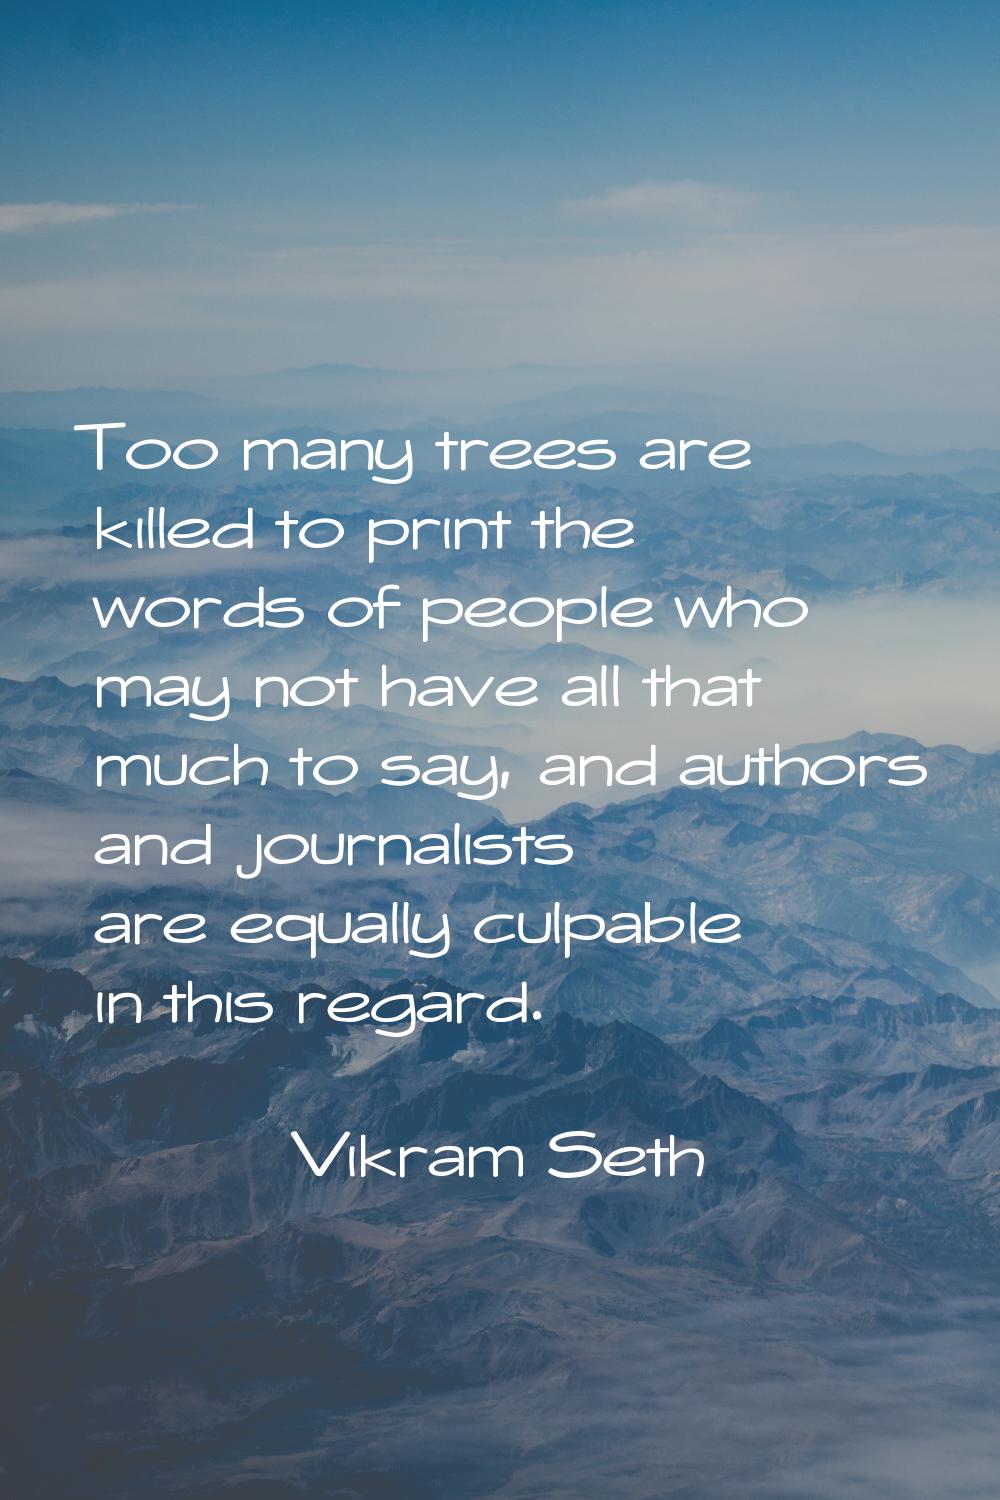 Too many trees are killed to print the words of people who may not have all that much to say, and a